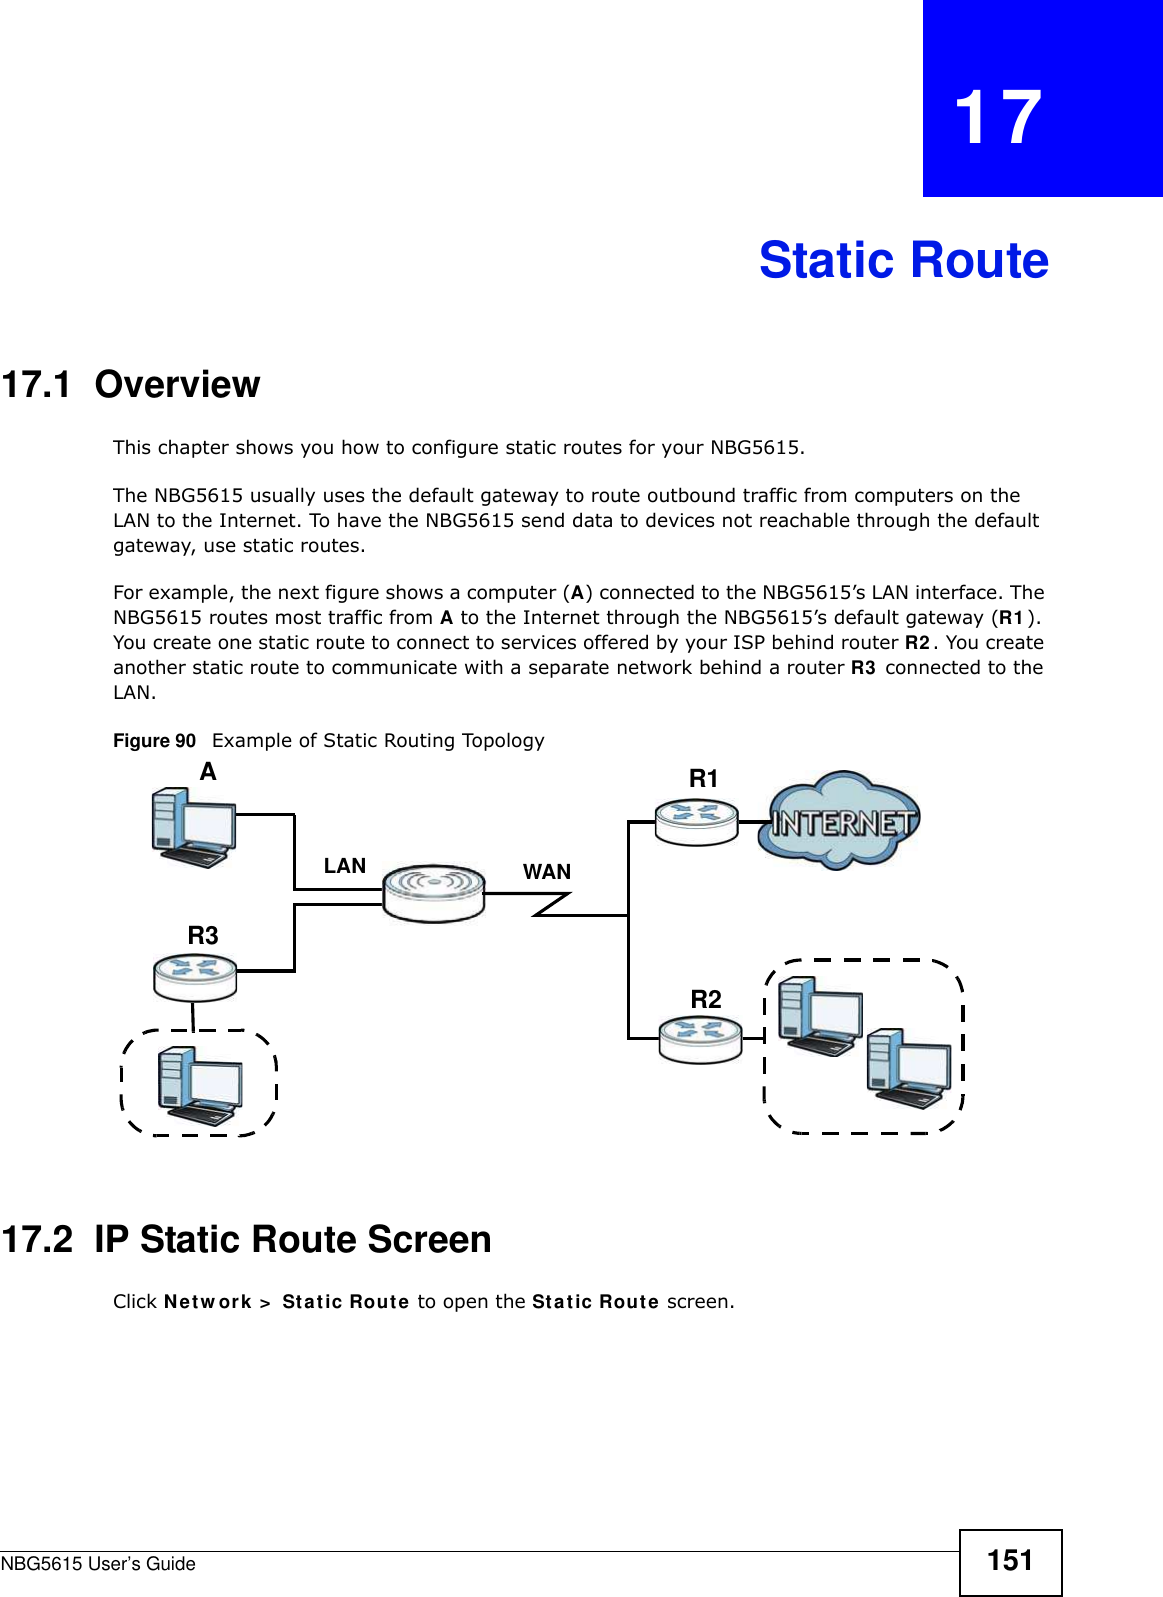 NBG5615 User’s Guide 151CHAPTER   17Static Route17.1  Overview   This chapter shows you how to configure static routes for your NBG5615.The NBG5615 usually uses the default gateway to route outbound traffic from computers on the LAN to the Internet. To have the NBG5615 send data to devices not reachable through the default gateway, use static routes.For example, the next figure shows a computer (A) connected to the NBG5615’s LAN interface. The NBG5615 routes most traffic from A to the Internet through the NBG5615’s default gateway (R1 ). You create one static route to connect to services offered by your ISP behind router R2 . You create another static route to communicate with a separate network behind a router R3 connected to the LAN.Figure 90   Example of Static Routing Topology17.2  IP Static Route Screen Click Netw ork &gt;  Static Route to open the Static Route screen. WANR1R2AR3LAN